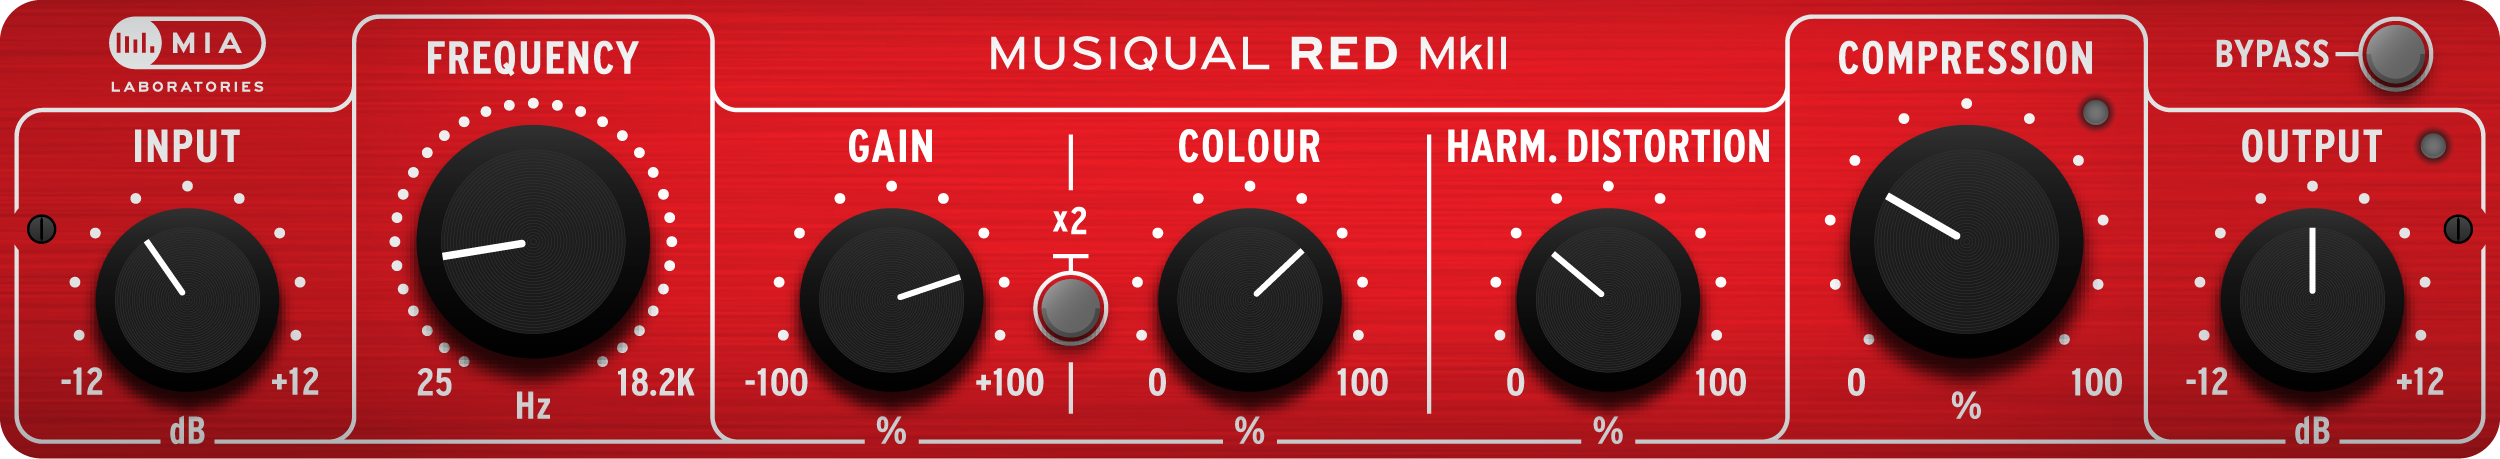 Musiqual RED MkII